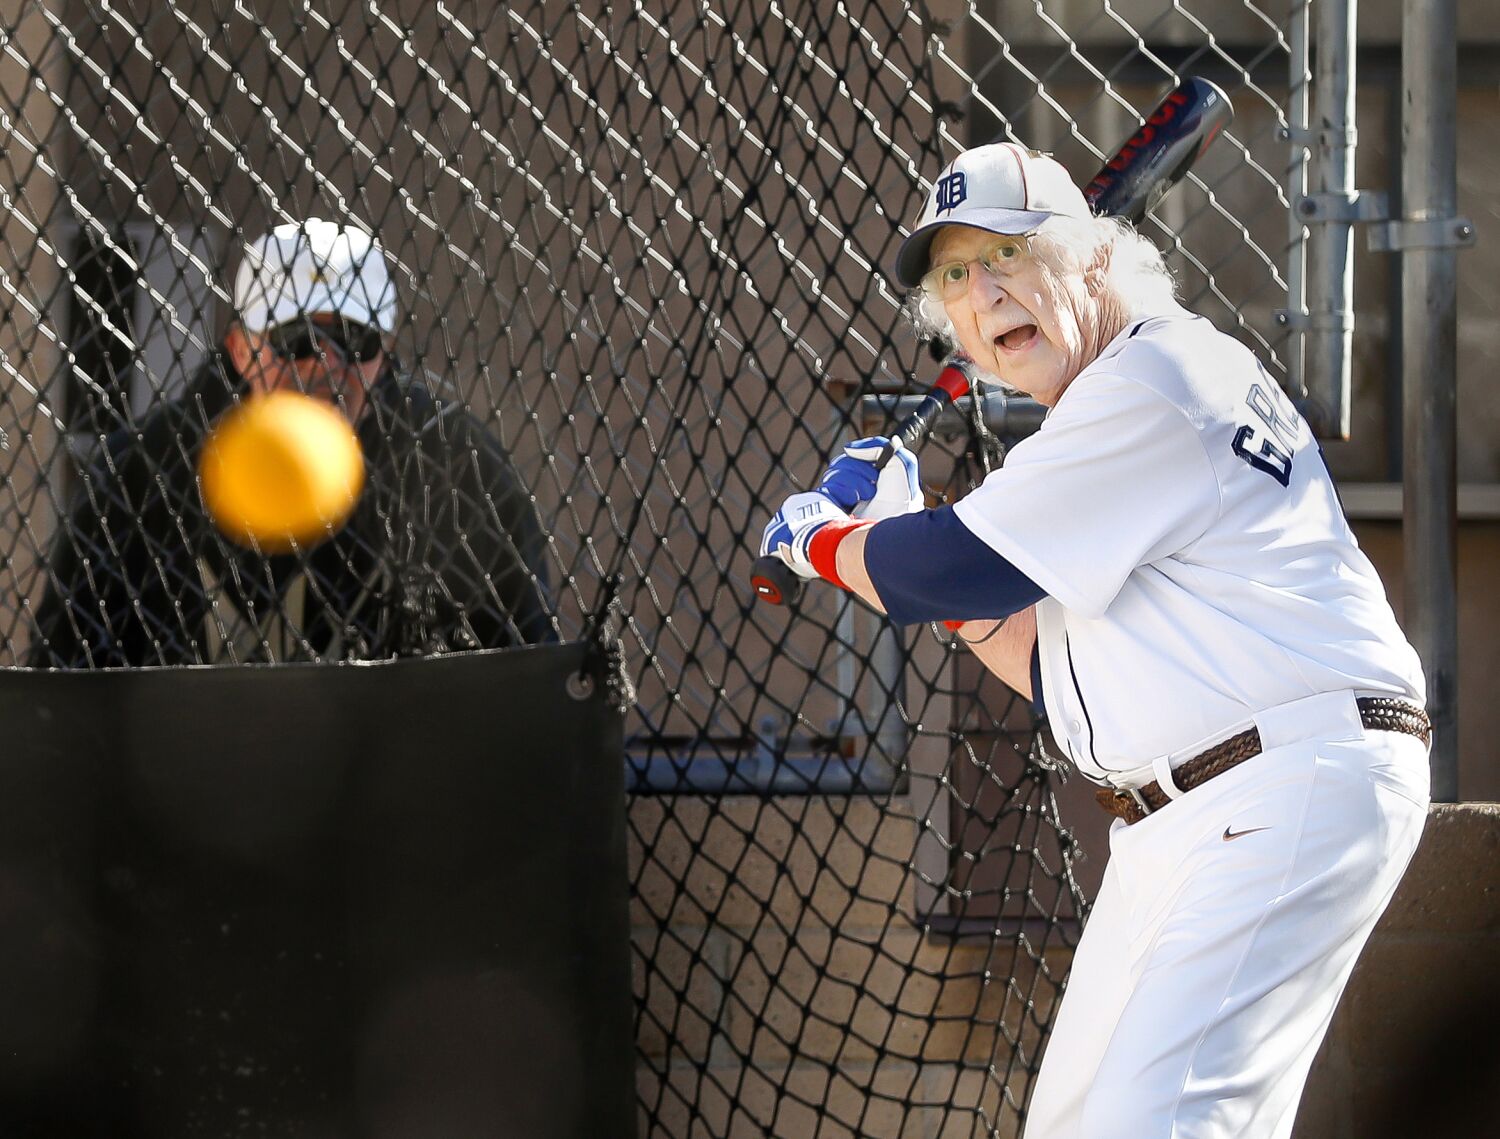 At 88, fastballs are flying at him, and this slugger is swinging for the fences